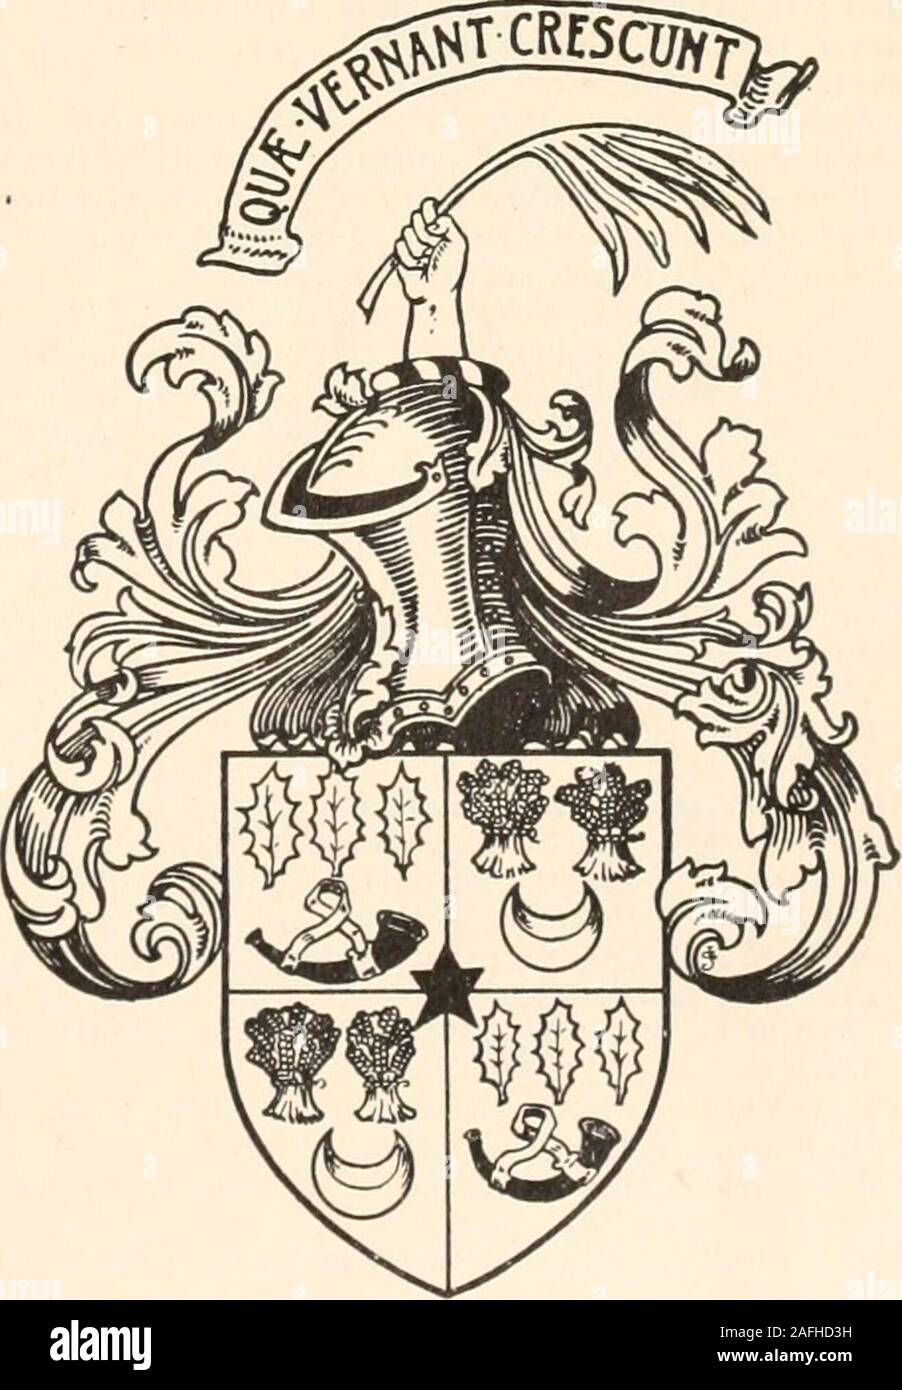 . Armorial families : a directory of gentlemen of coat-armour. of WilliamKendall, of Bourton-on-the-Water; 2nd, 1877,Anna Maria {d. 1885), d. of Rev. Ebenezer Pledge ;3rd, 1893, Emily Julia, d. of Joseph Burch, ofTuddenham Hall, Suffolk :—John Alexander Burnett, Esq., J.P., h. 1852 ; m. 1877,Charlotte Susan [d, 1925), d. of Arthur Forbes Gordon,of Rayne, co. Aberdeen ; and has issue—(i) ArthurMaubray Burnett, Gentleman, h. 1878 ; (2) CharlesStuart Burnett, Esq., C.B. (1927), C.B.E. (1919), D.S.O.(1918), Lieut.-Col. Reserve of Of&cers, and Wing-Comm.R.A.F., served S. Africa 1900-1, Great War, 1 Stock Photo